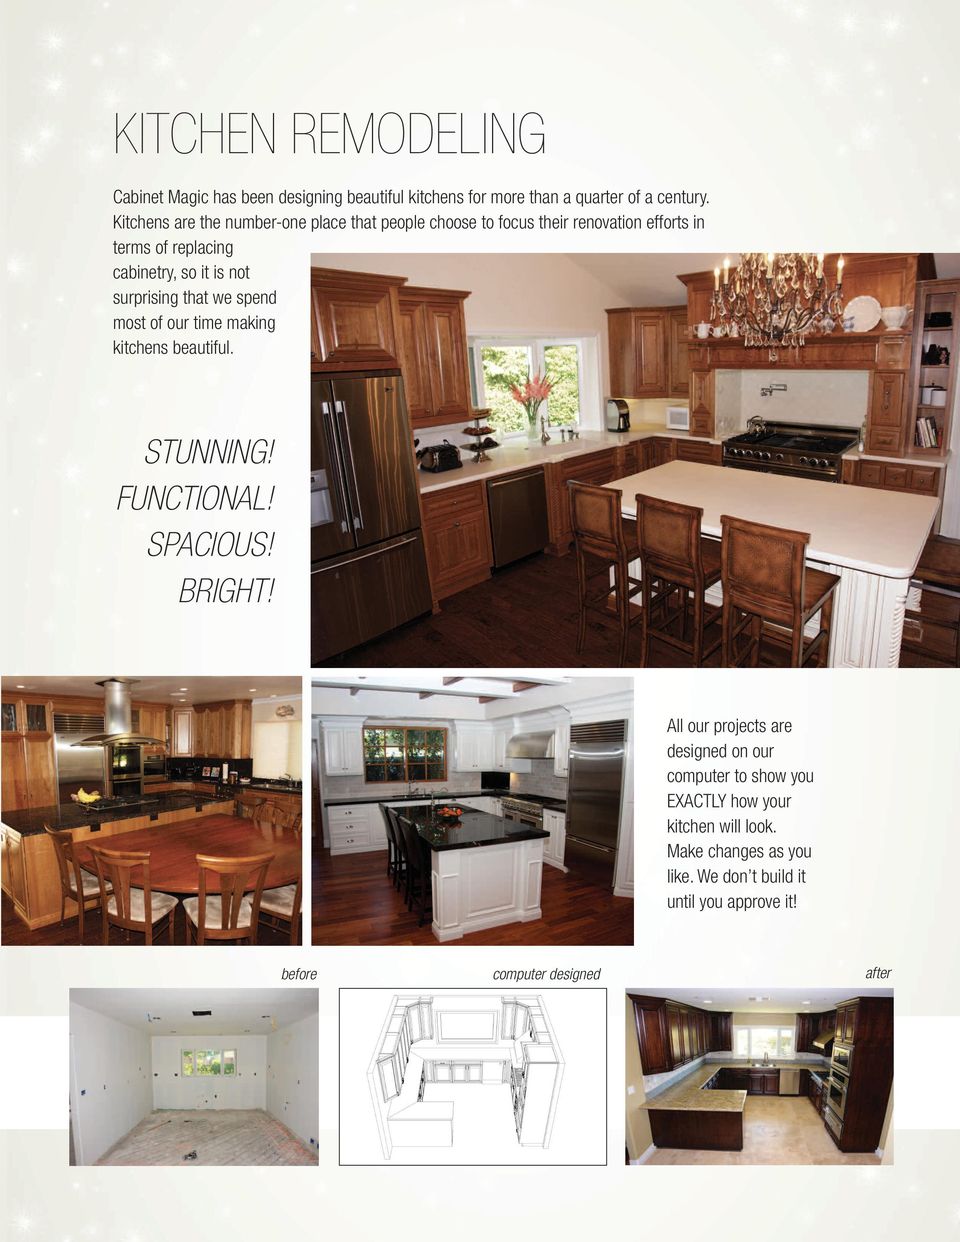 surprising that we spend most of our time making kitchens beautiful. STUNNING! FUNCTIONAL! SPACIOUS! BRIGHT!